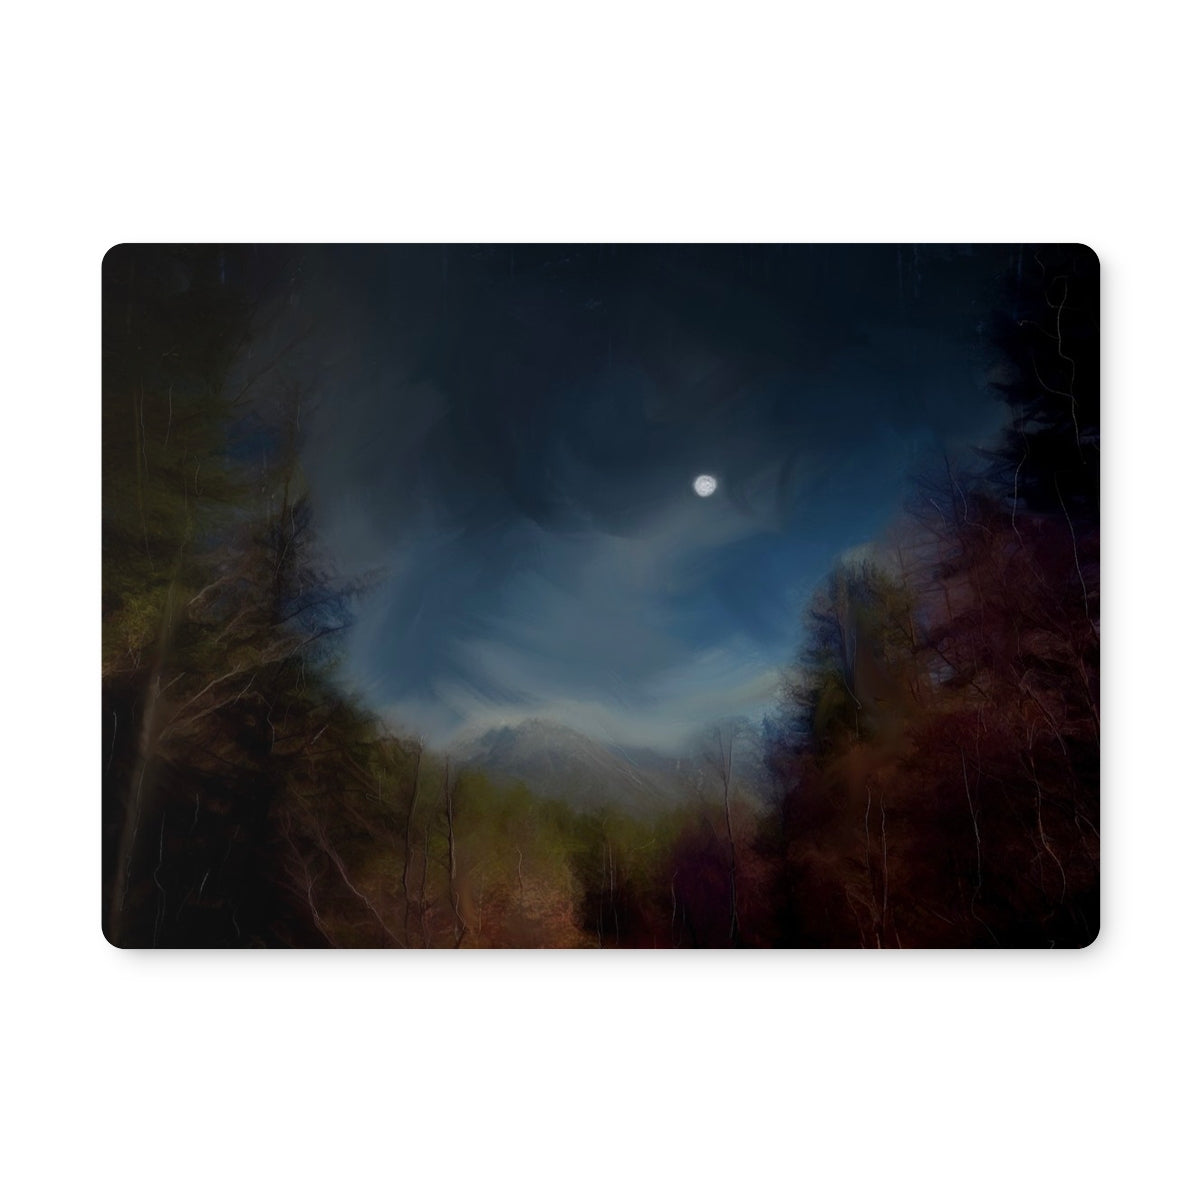 Glencoe Lochan Moonlight Art Gifts Placemat-Placemats-Scottish Lochs & Mountains Art Gallery-Single Placemat-Paintings, Prints, Homeware, Art Gifts From Scotland By Scottish Artist Kevin Hunter